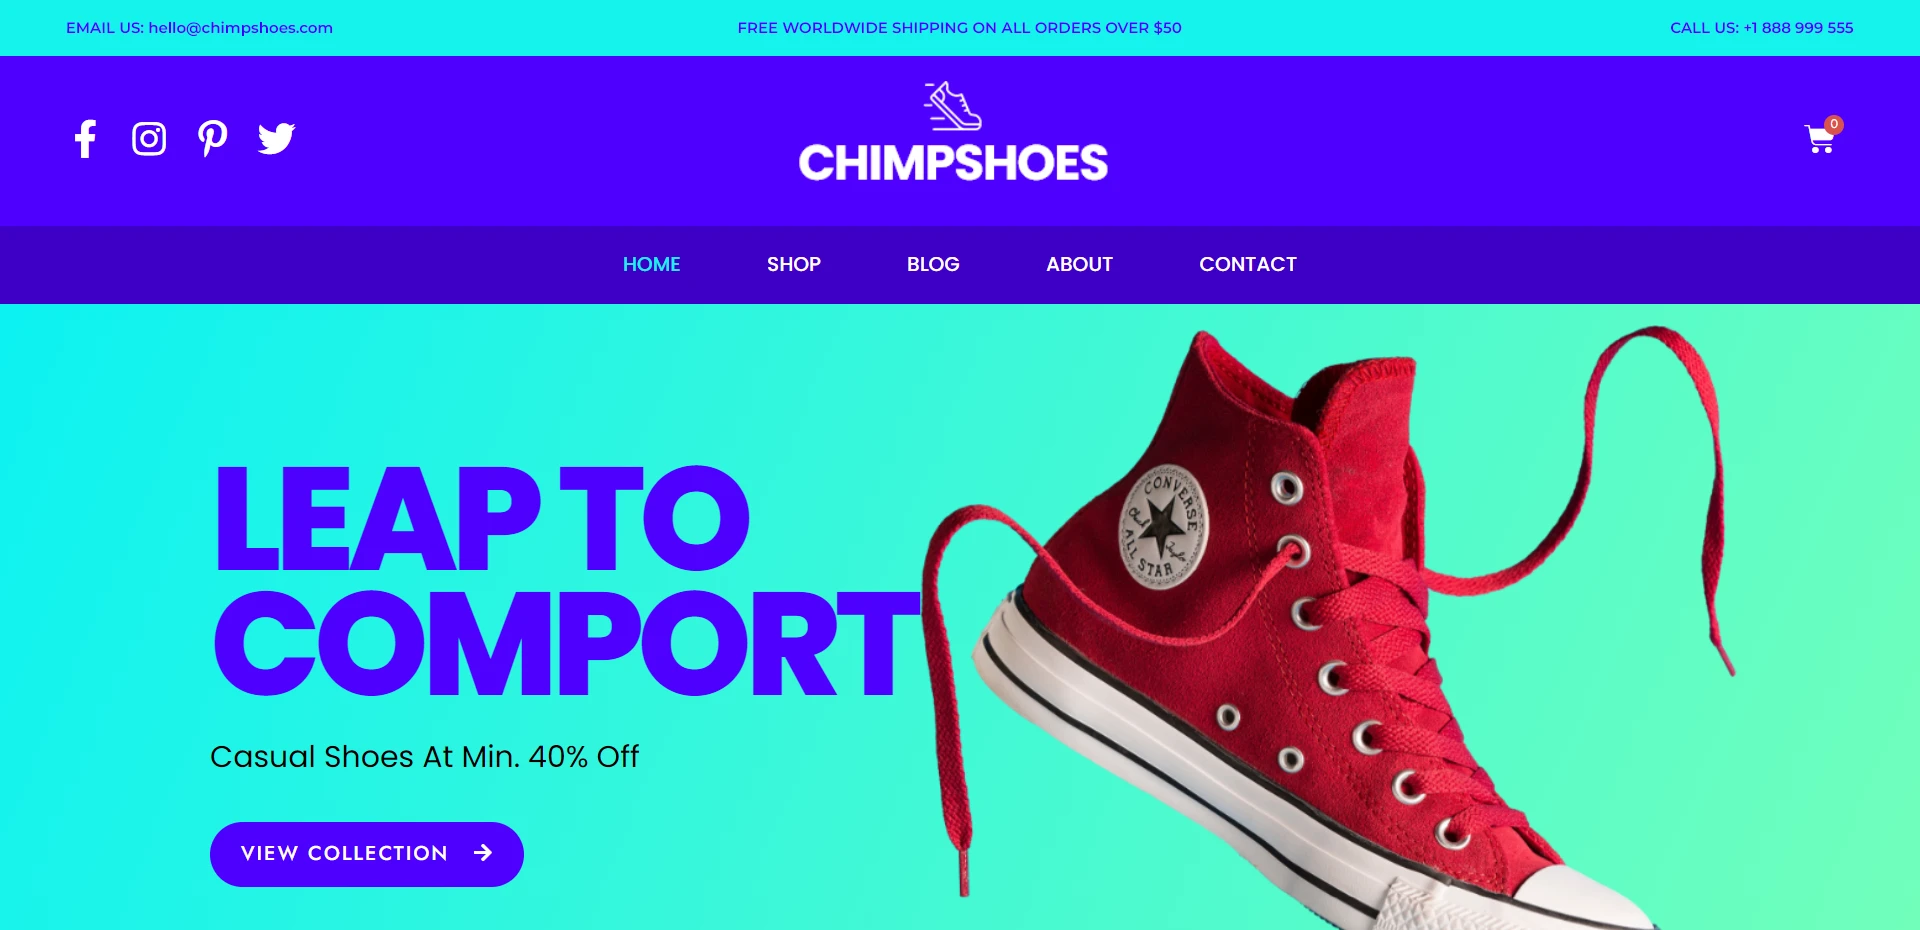 10 Top Shopify Stores - Best Shopify Website for Shoes - Simplr